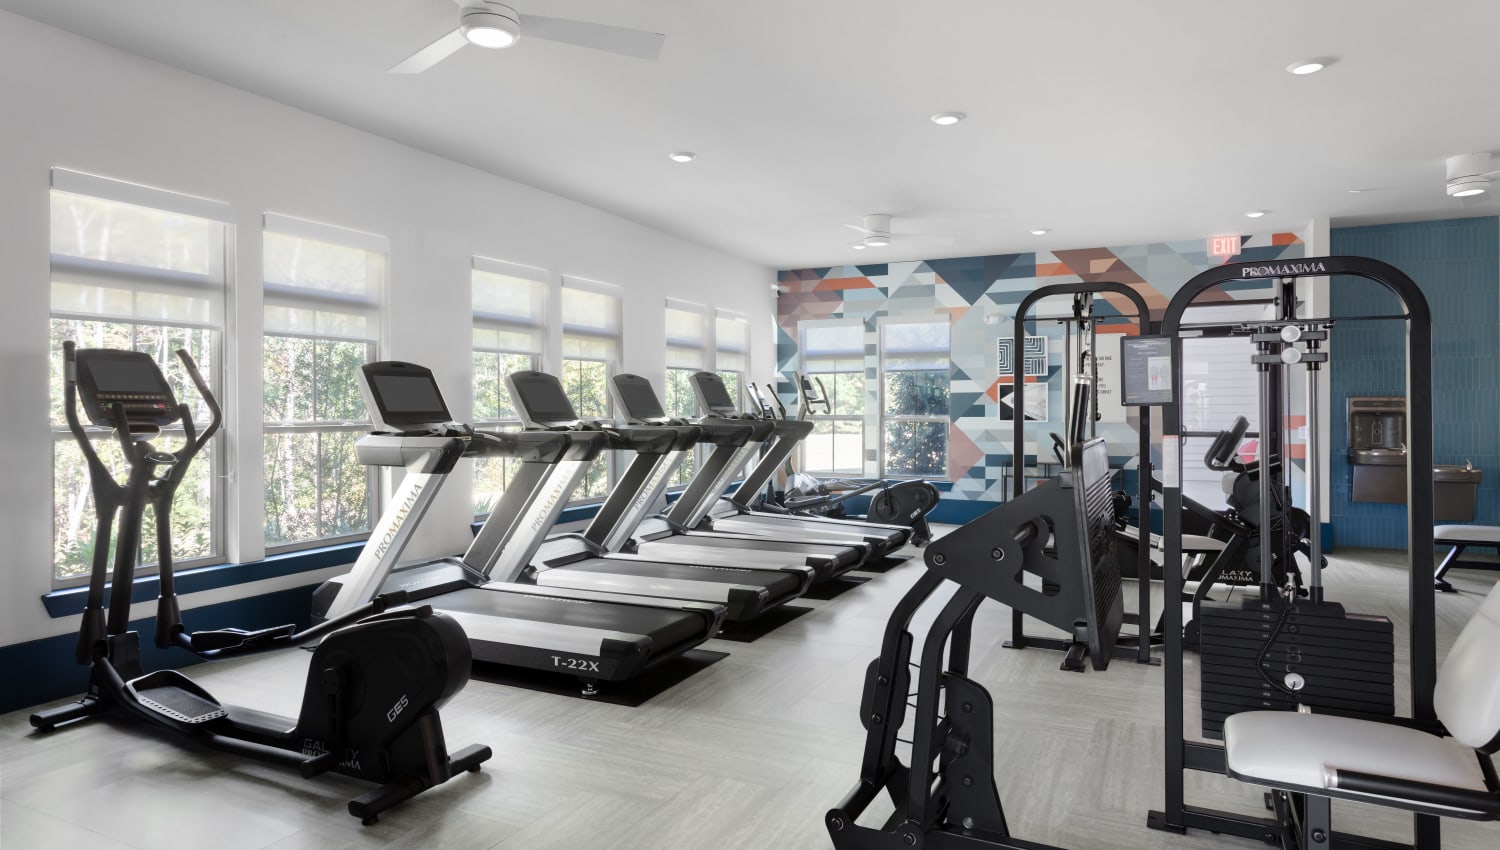 Well-equipped fitness center at Alleia Luxury Apartments in Savannah, Georgia